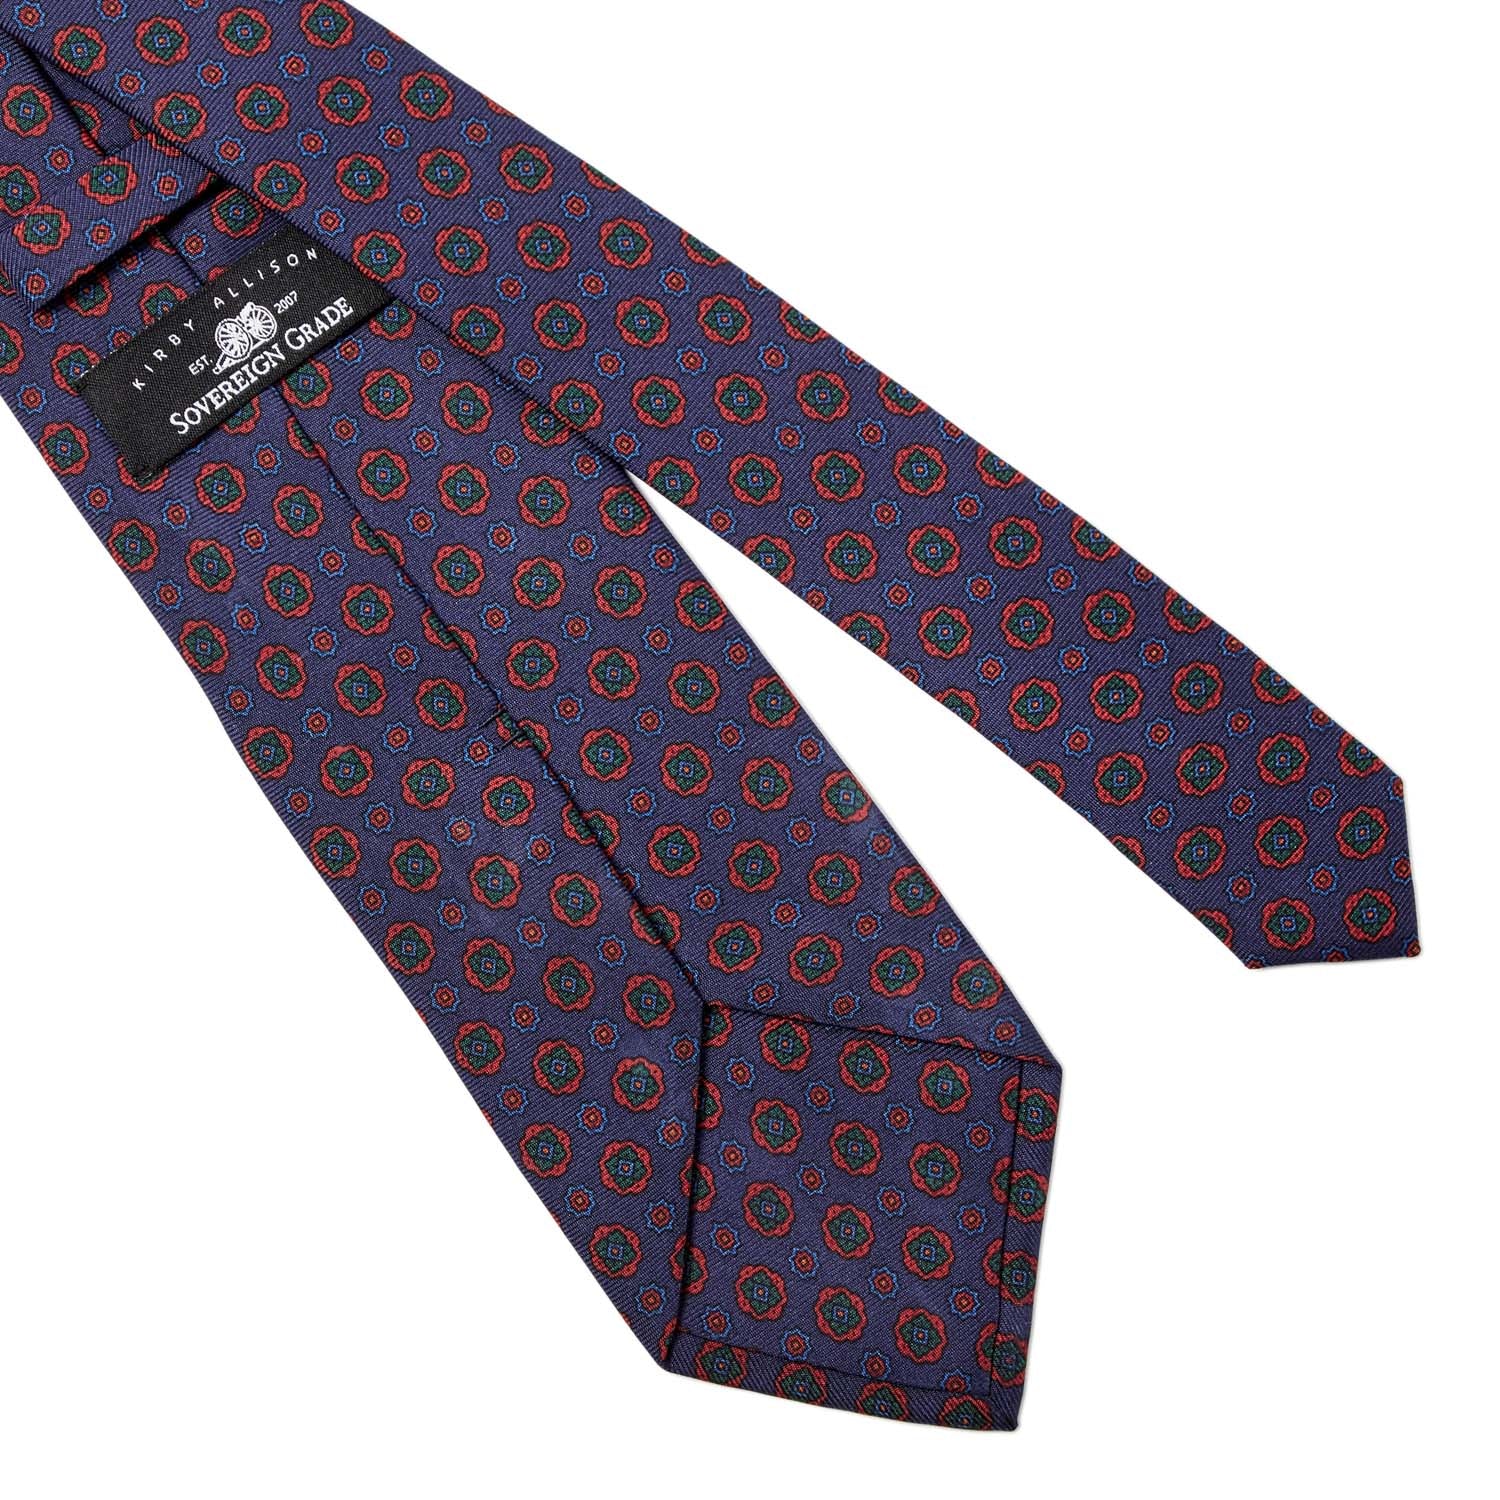 A highest quality KirbyAllison.com Sovereign Grade Dark Navy Geometric Floral Ancient Madder Tie (150x8.5 cm), made in the United Kingdom.